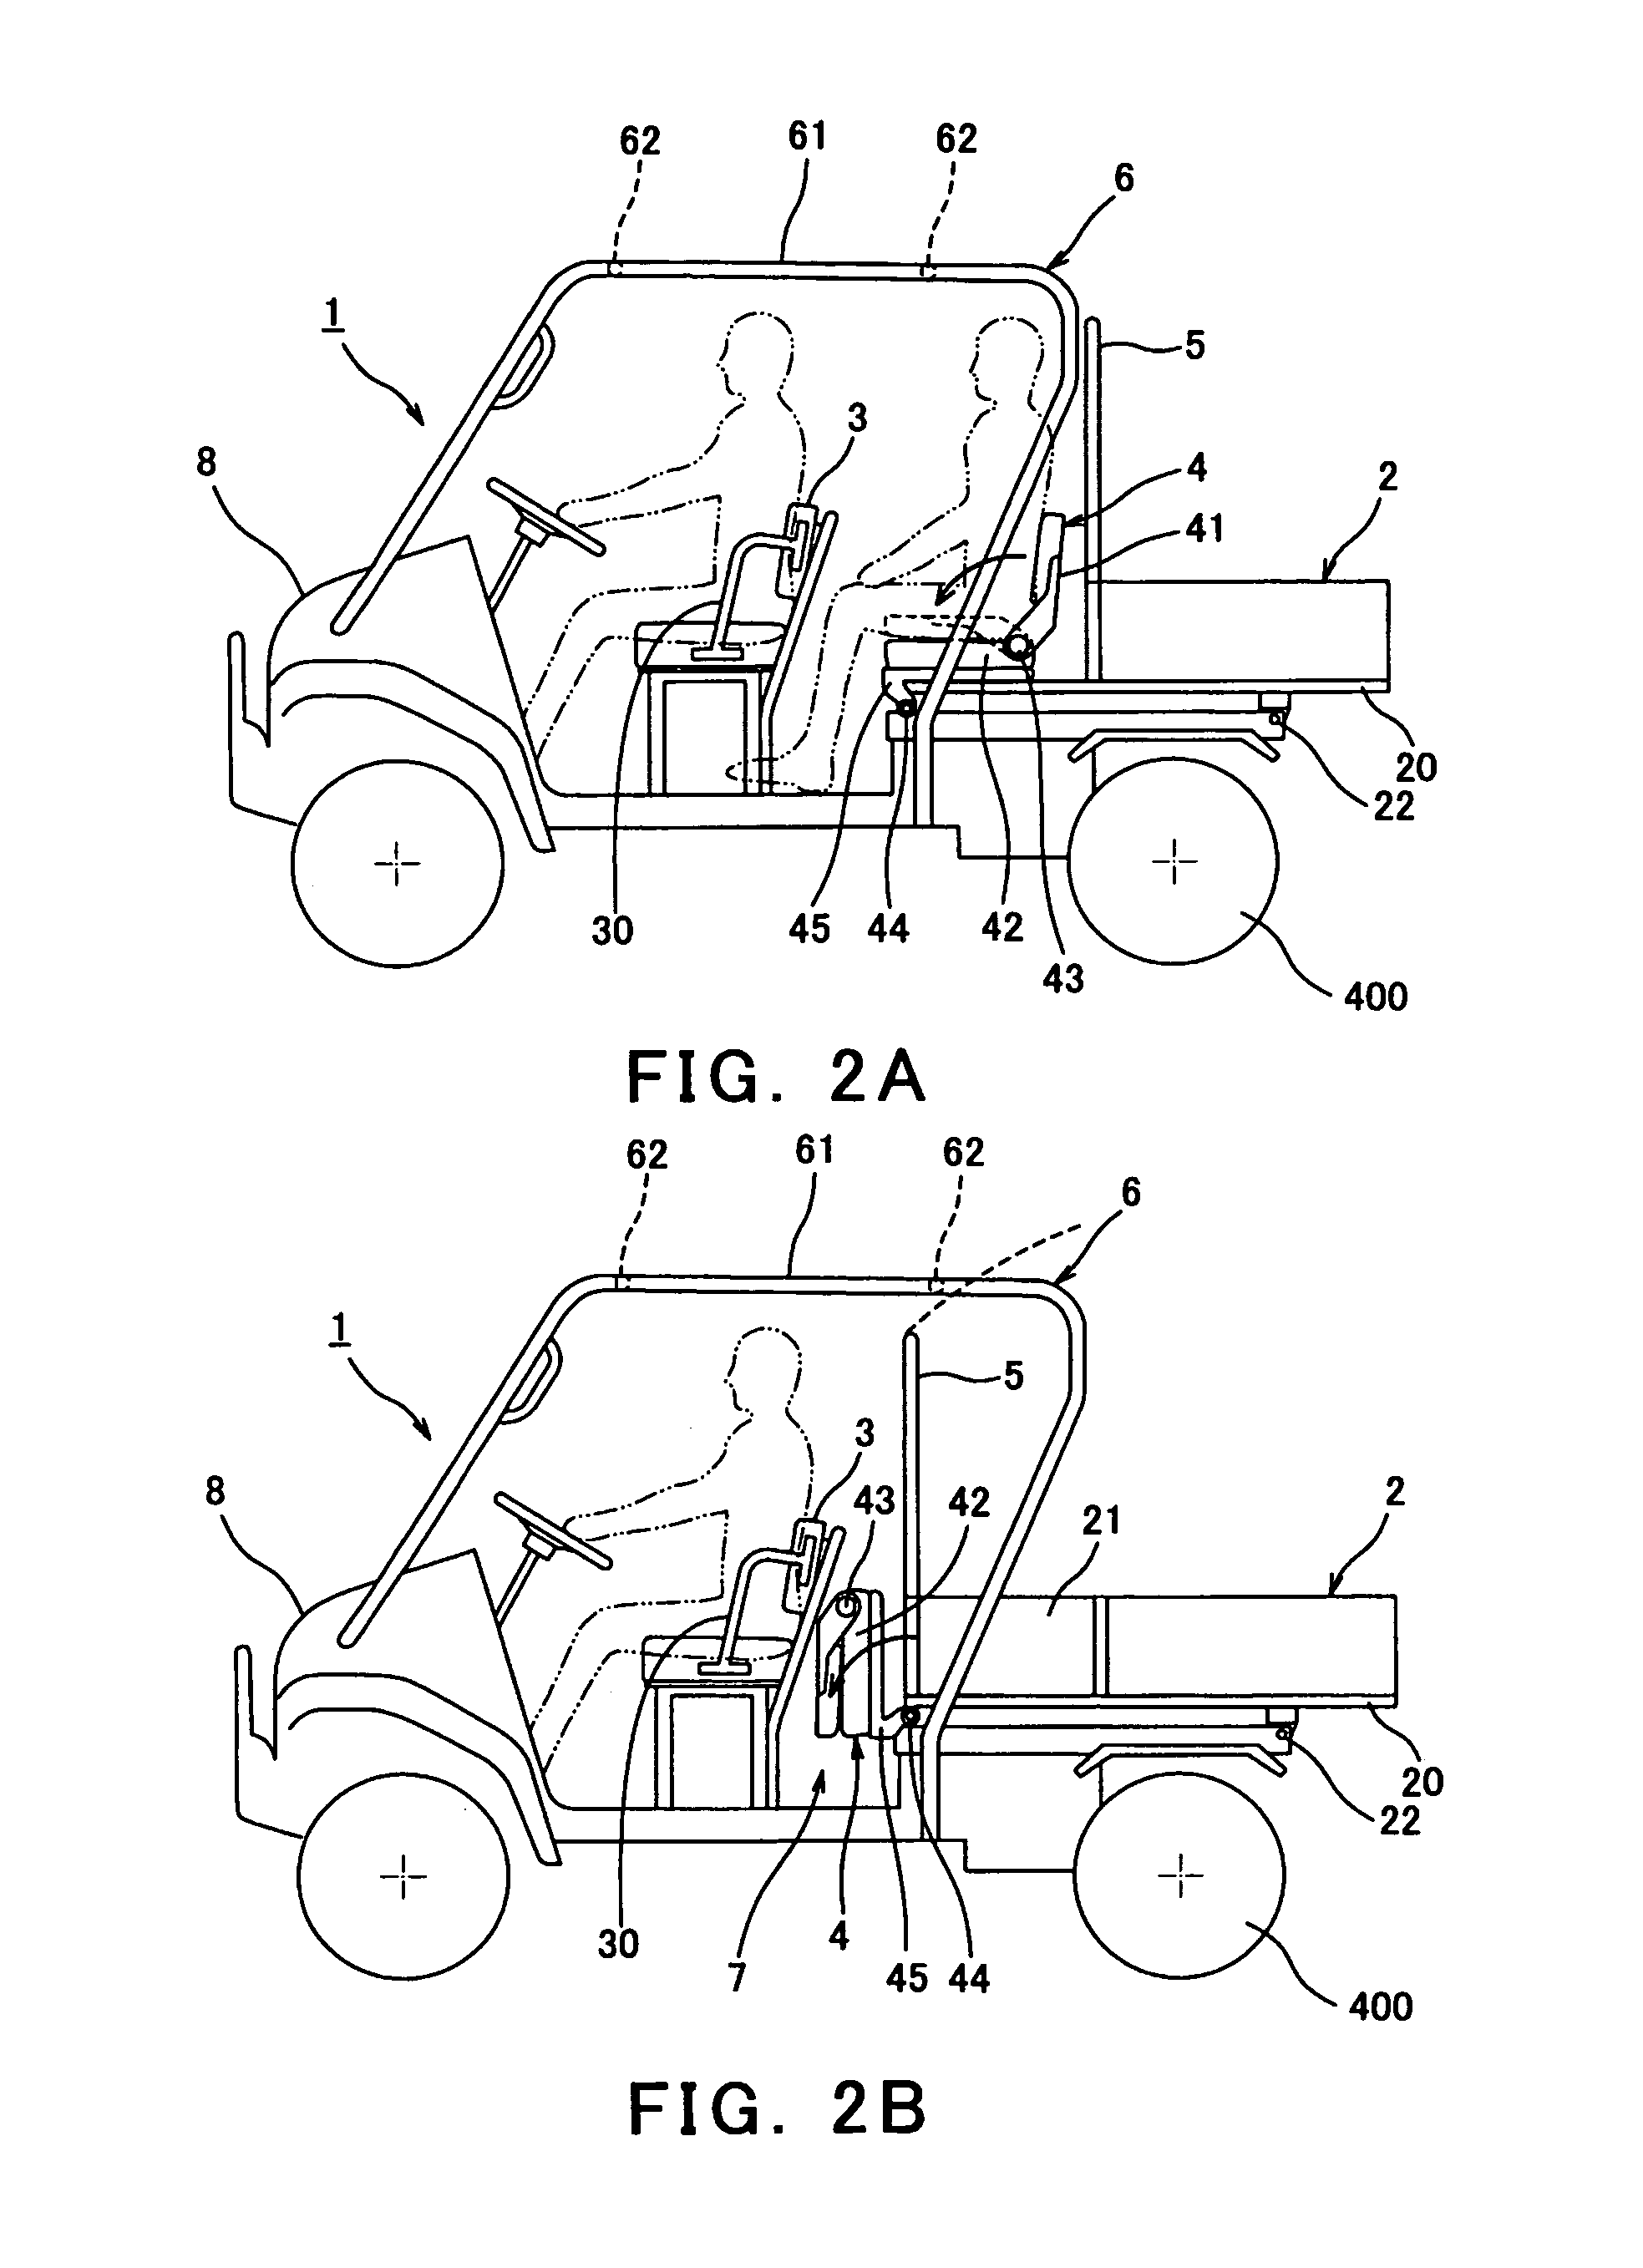 Pick-up style utility vehicle with two-way latch system